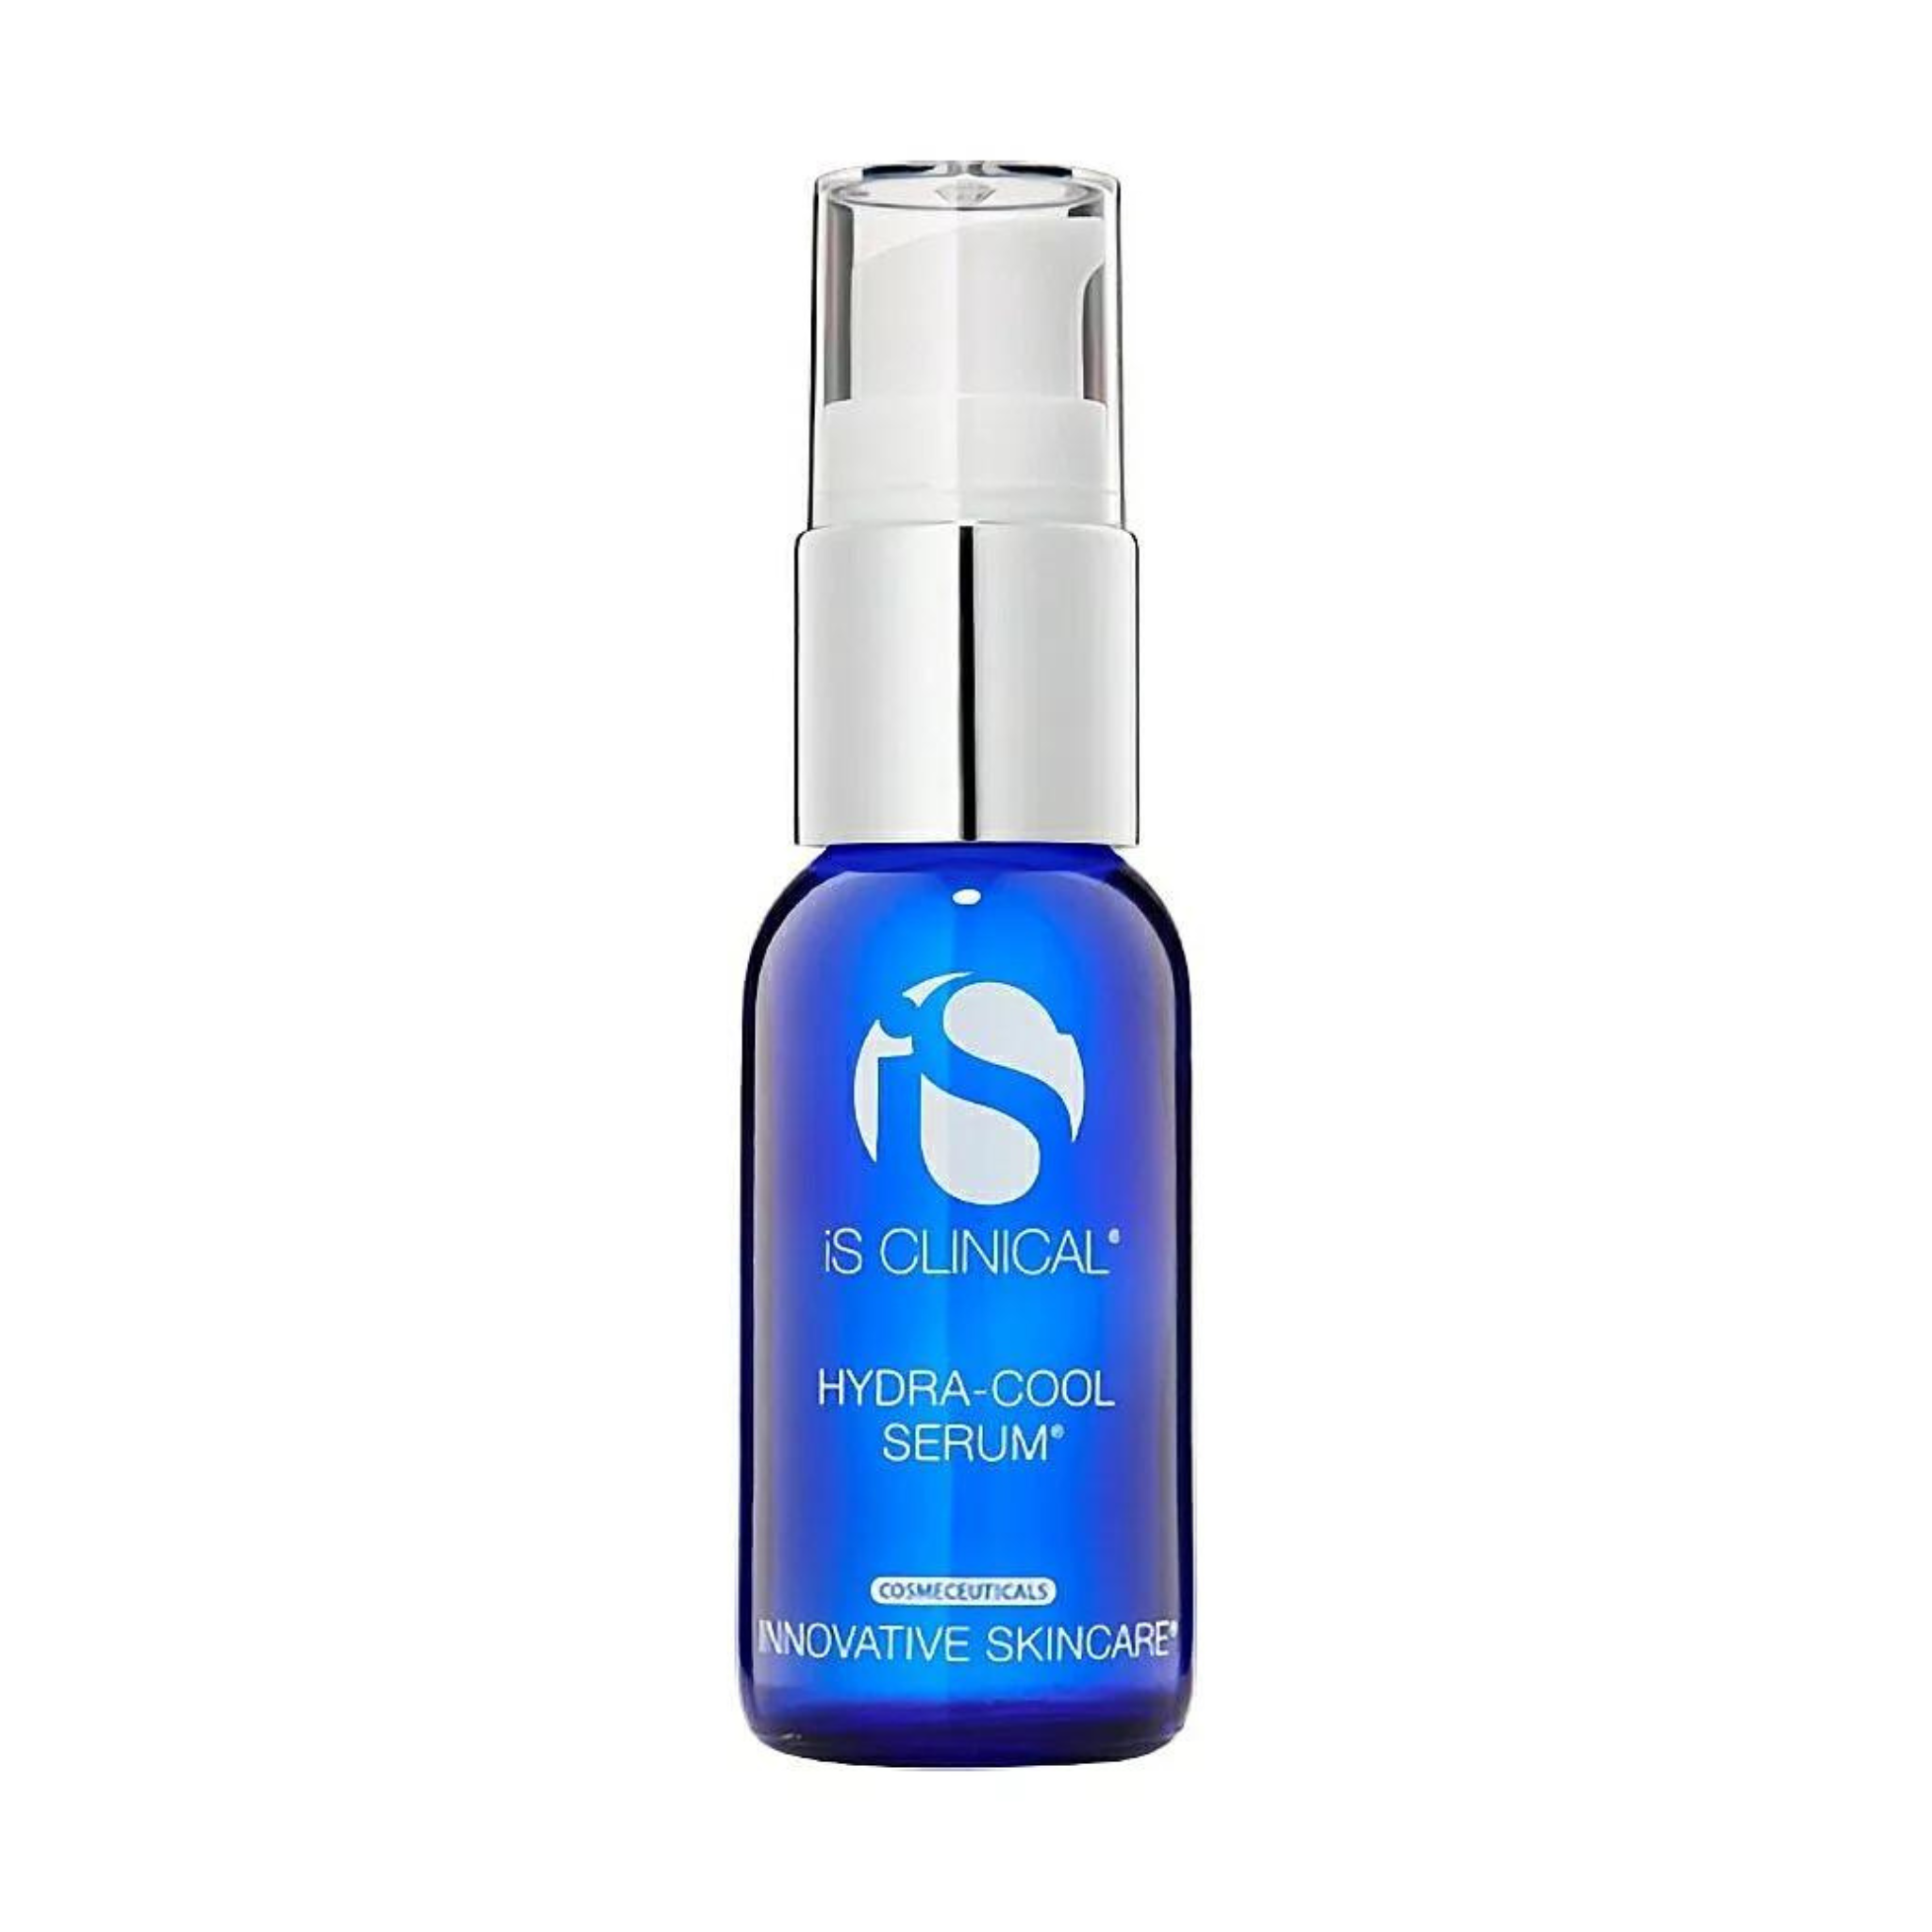 Hydra Cool Serum - iS Clinical